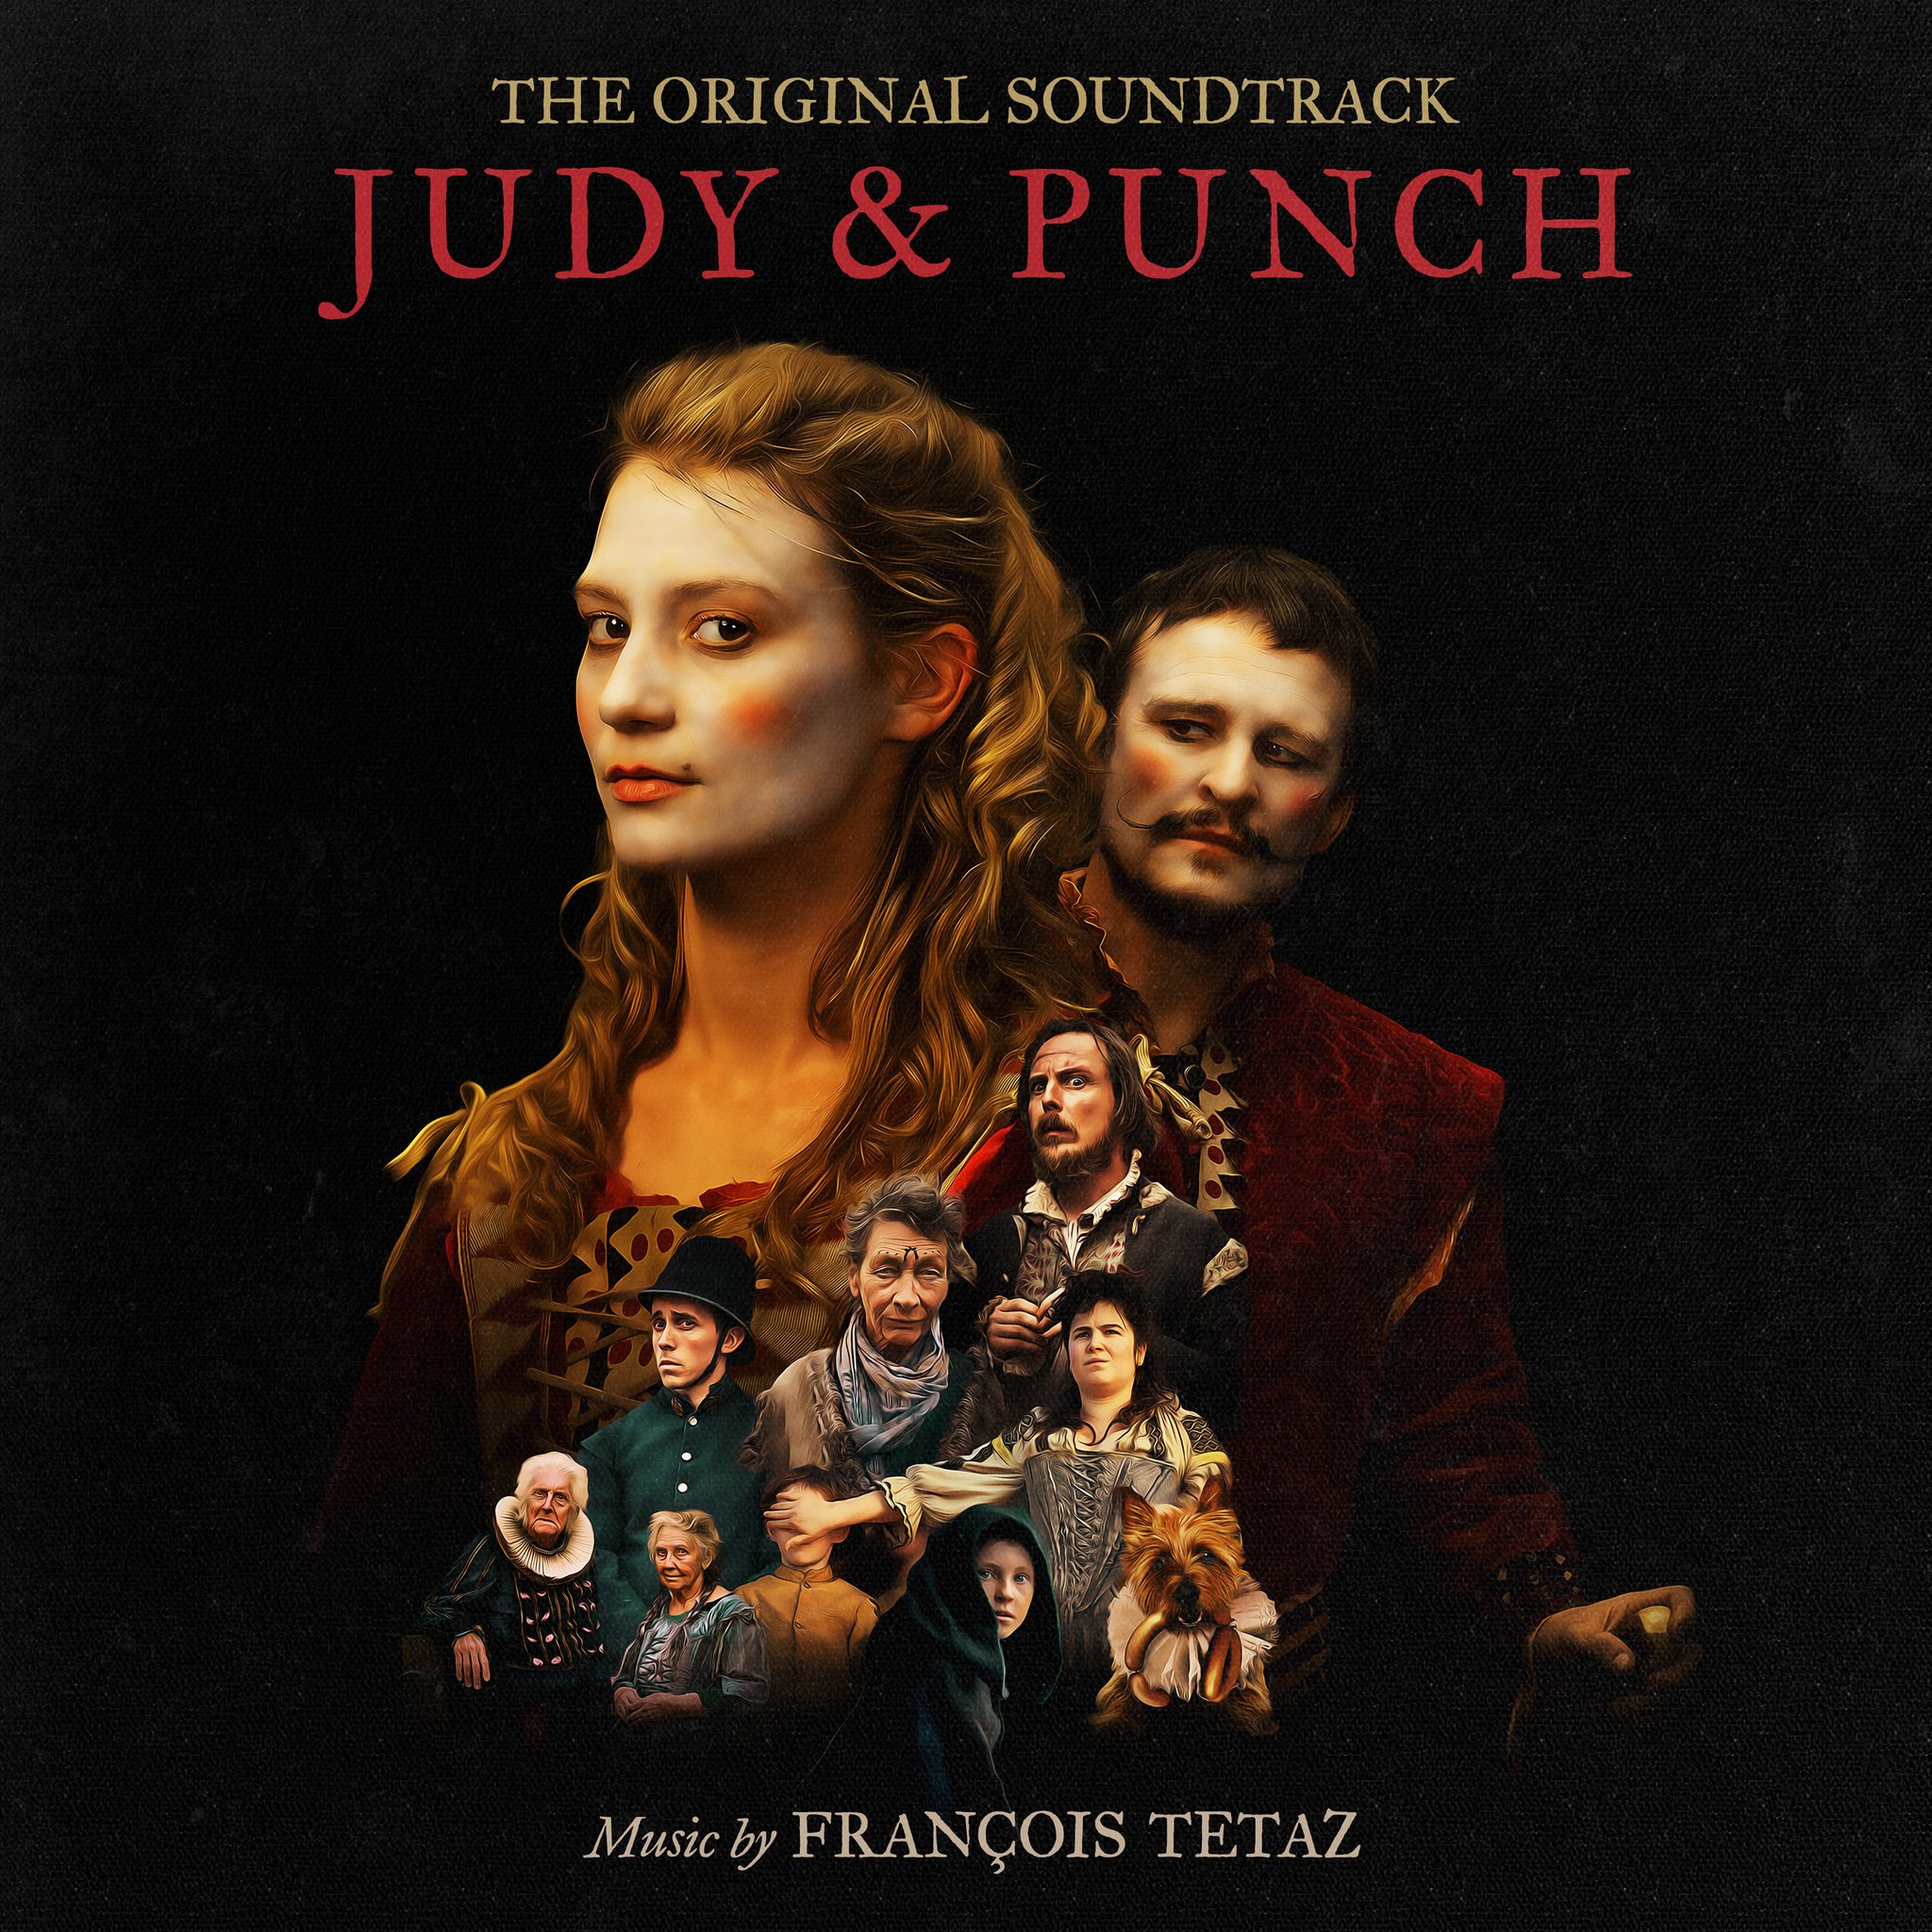 Judy & Punch (dition Spciale Vinyle)